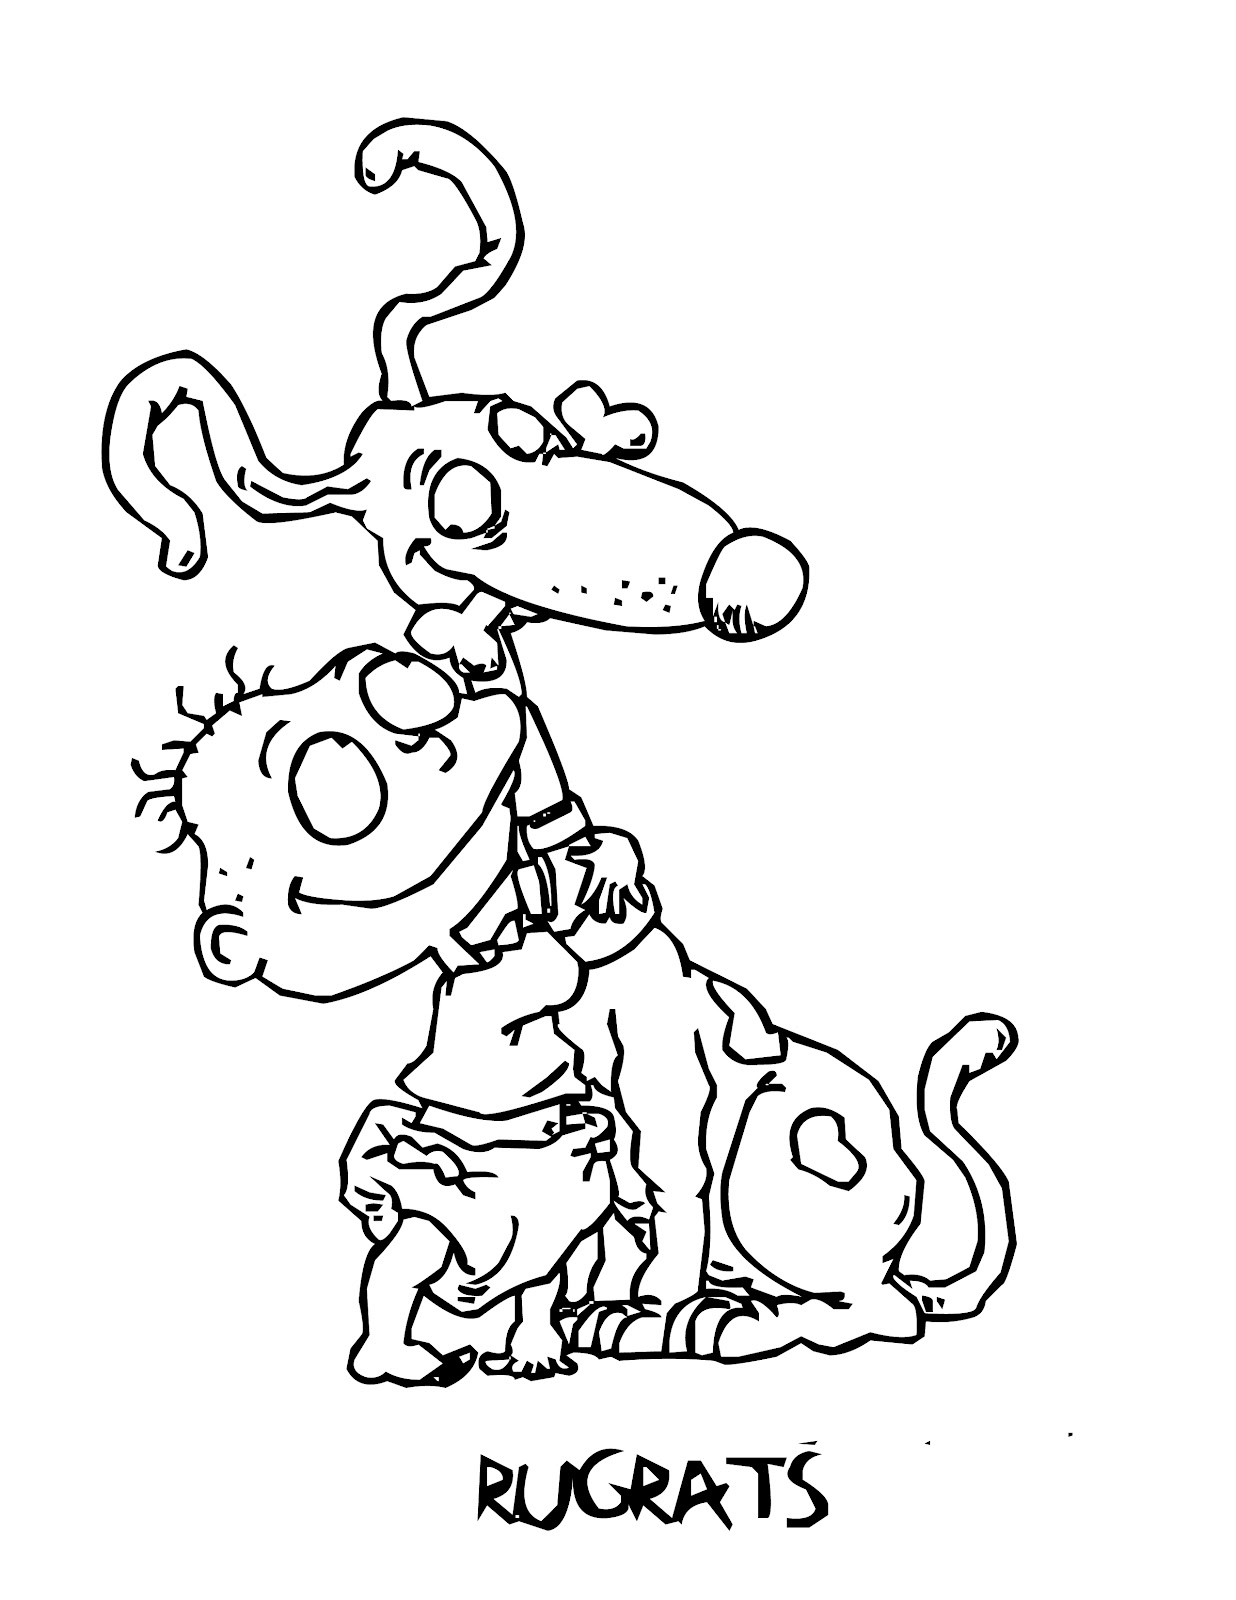 Coloring page: Rugrats (Cartoons) #52785 - Free Printable Coloring Pages